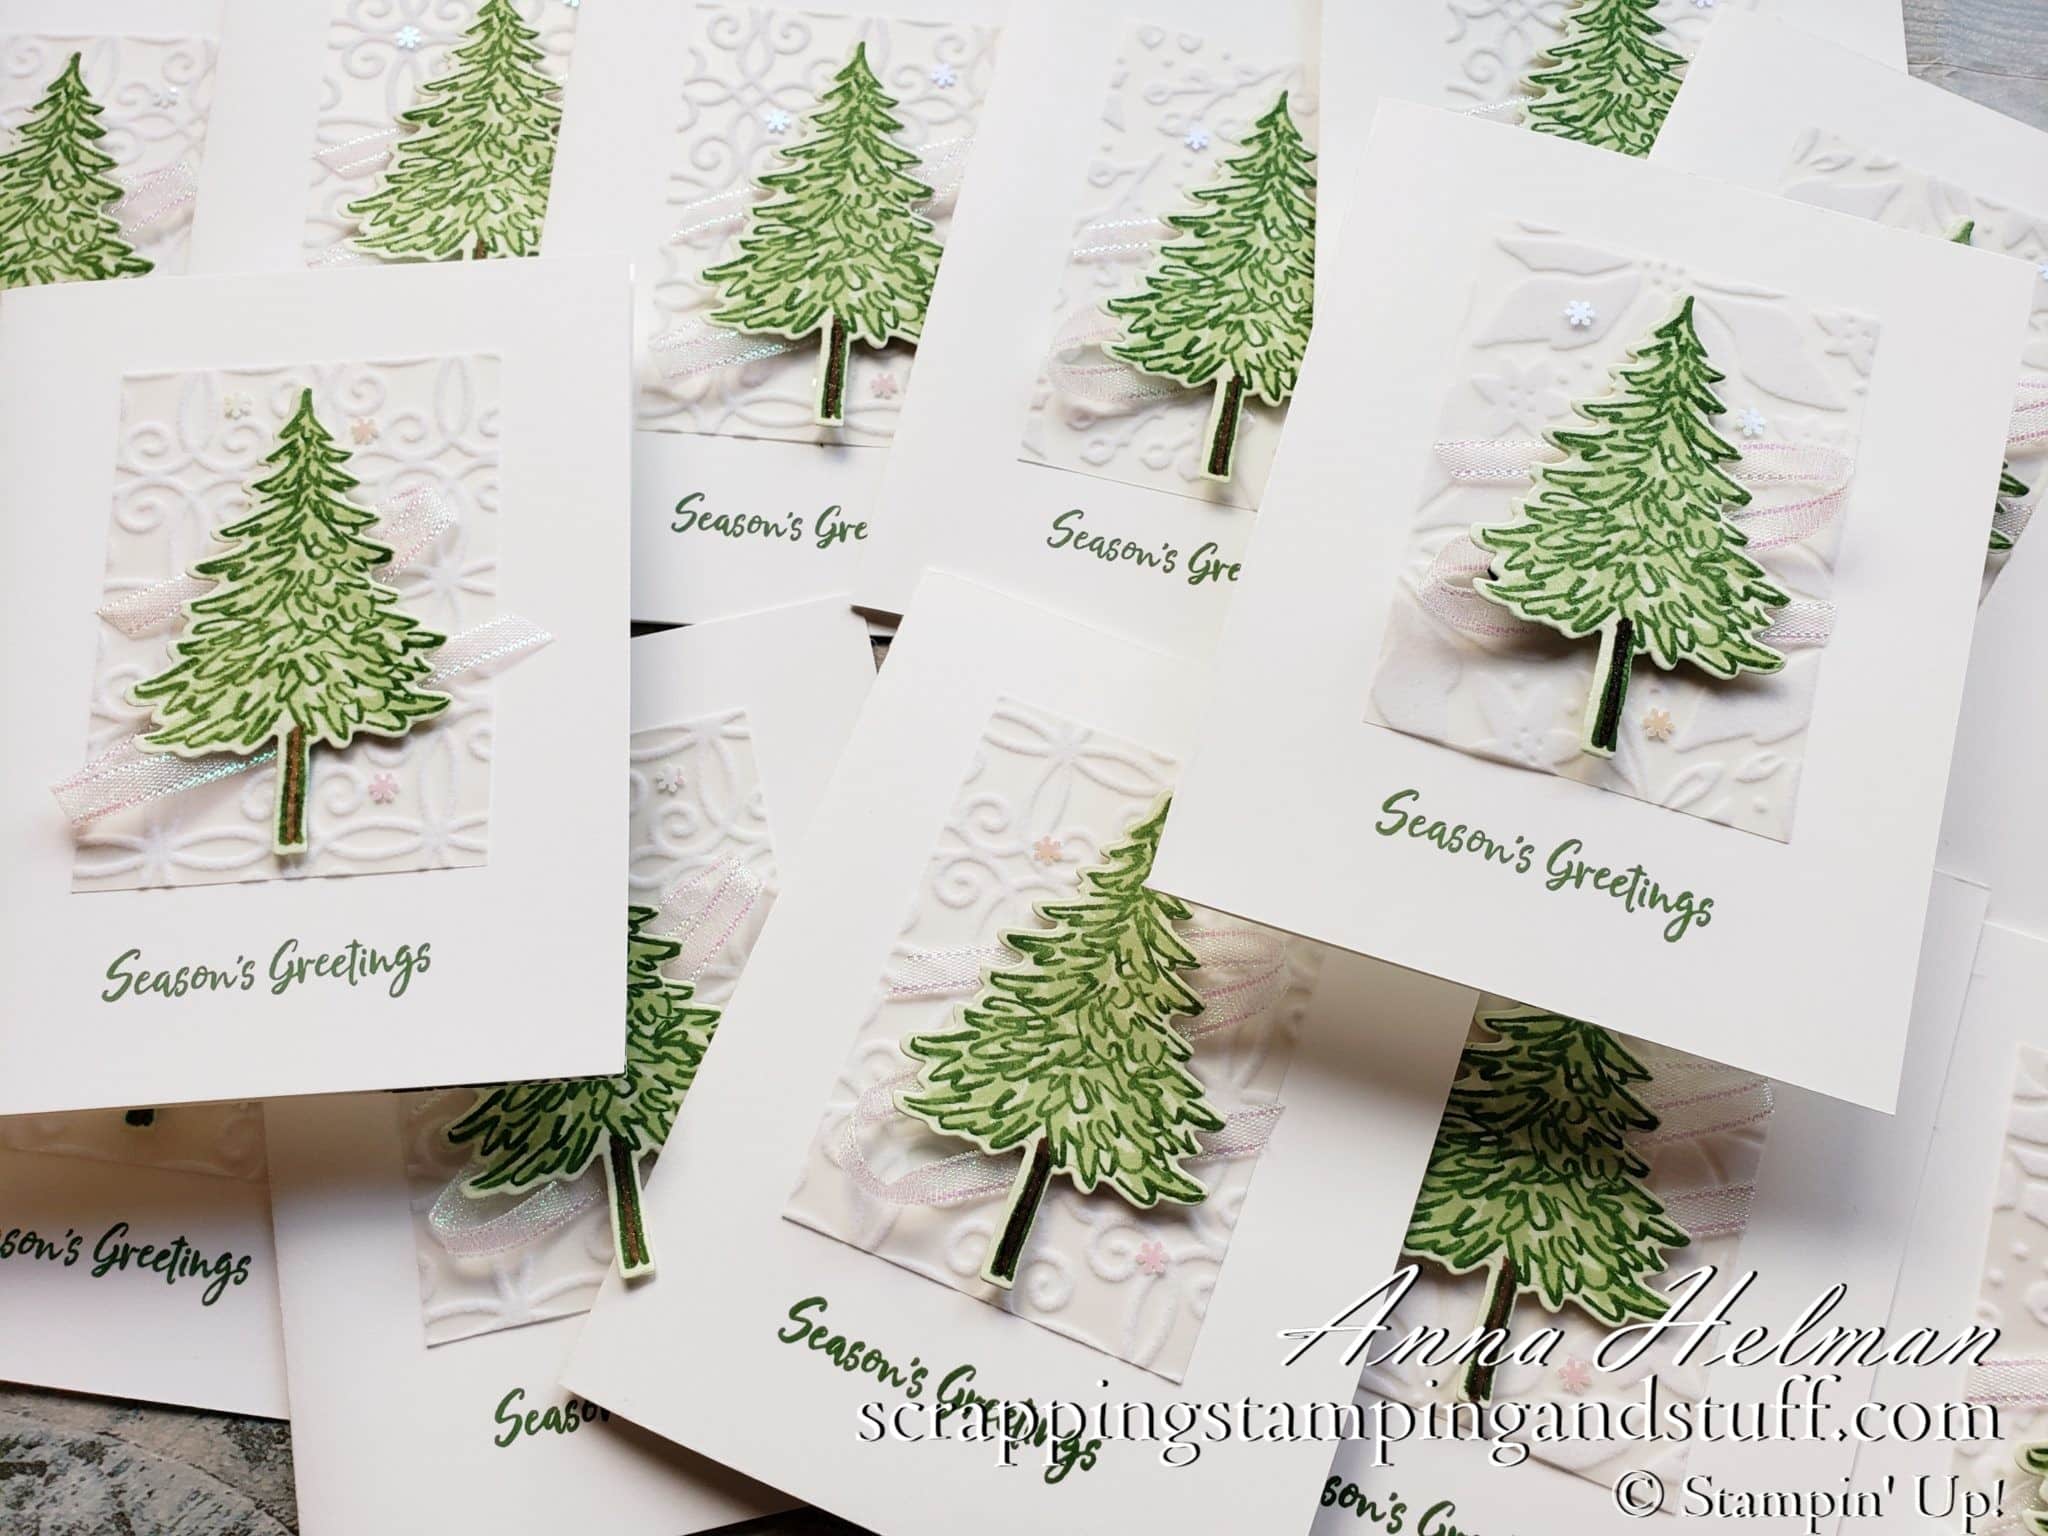 Stampin Up In The Pines – A Clean And Simple Swap Card!